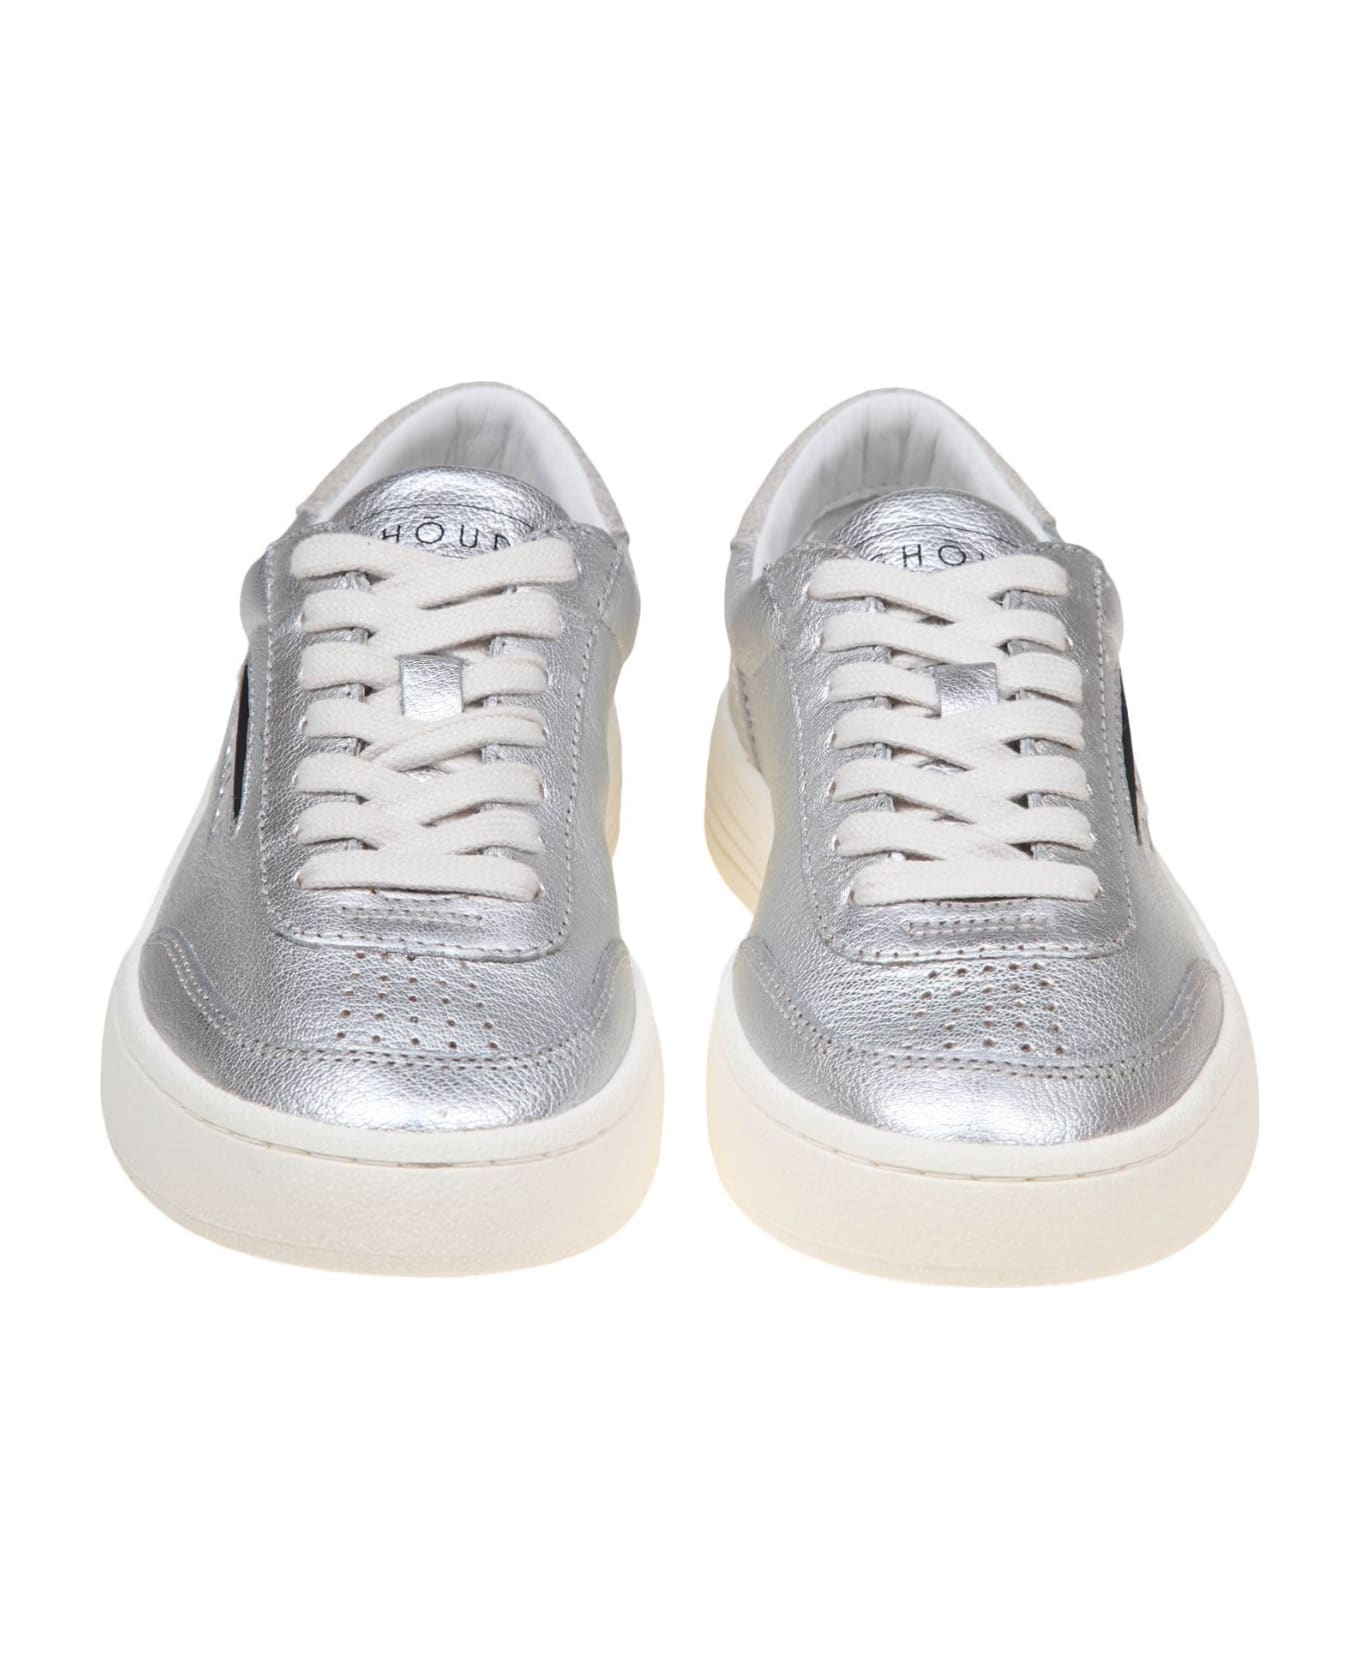 GHOUD Lido Low Sneakers In Silver Leather - CRACKLE/MIRROR SILV